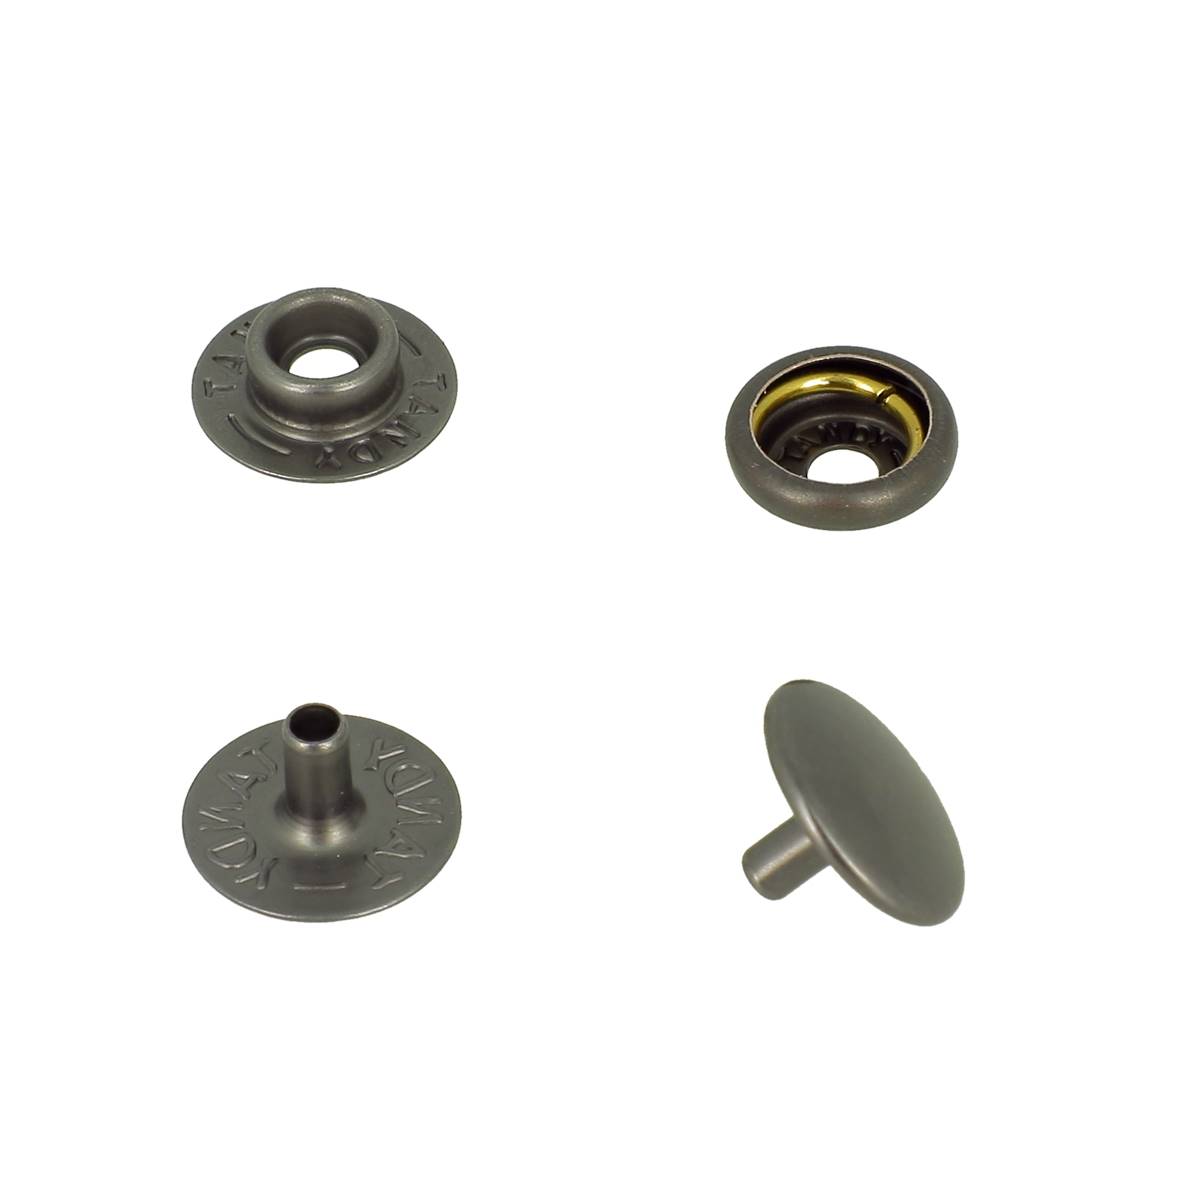 Lot de Boutons pression FORT - LINE 24 : 15mm - Tandy Leather